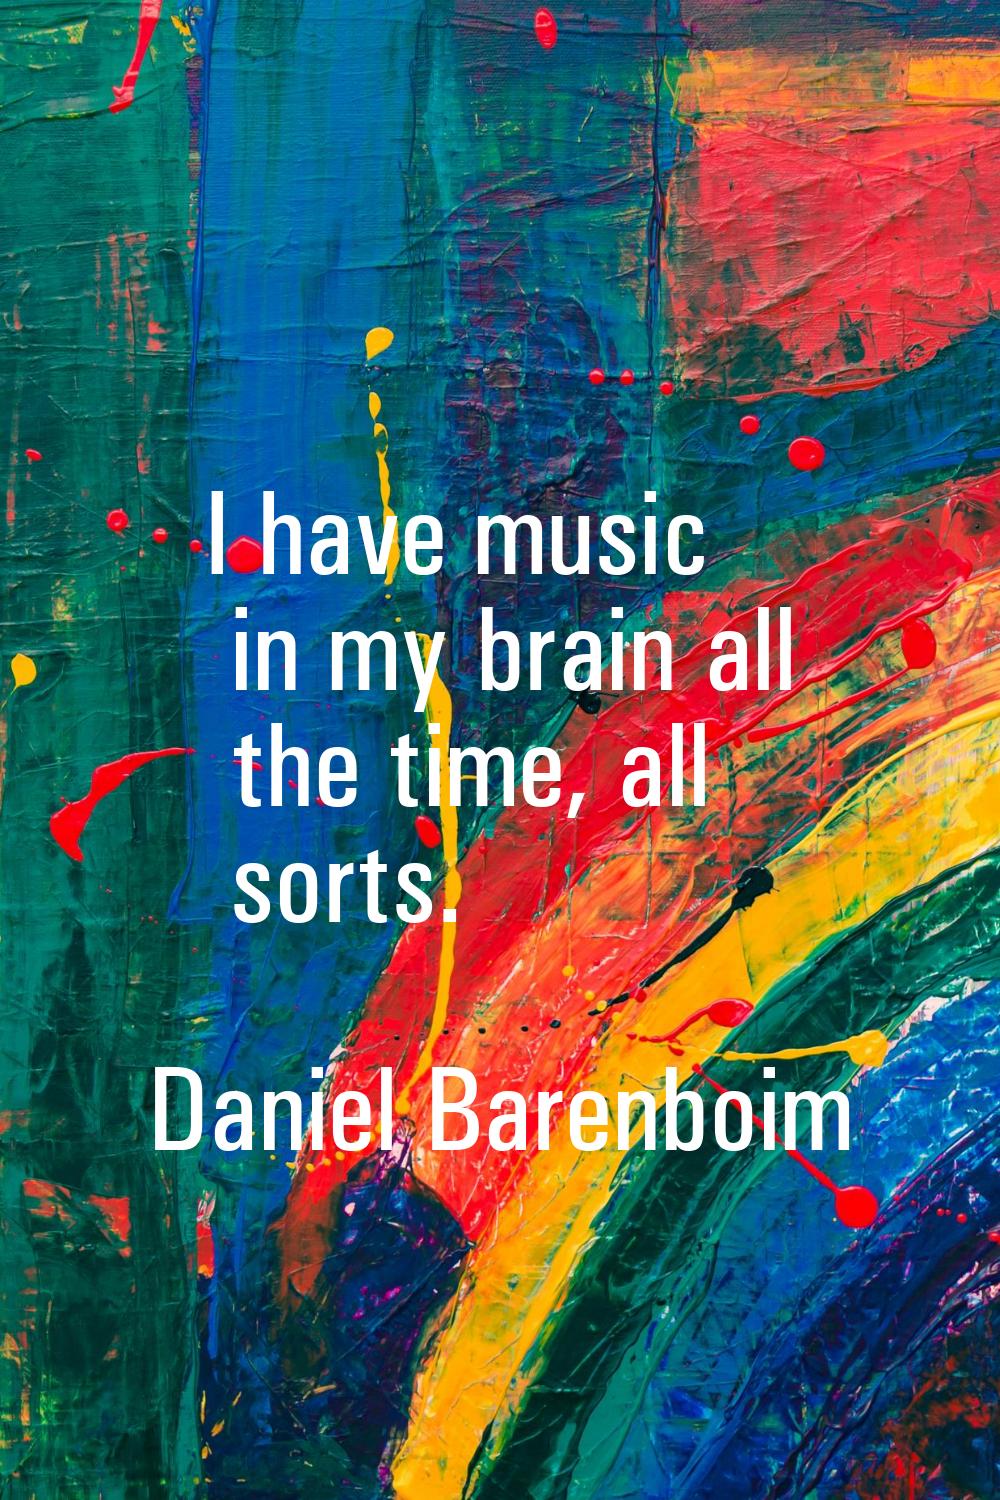 I have music in my brain all the time, all sorts.